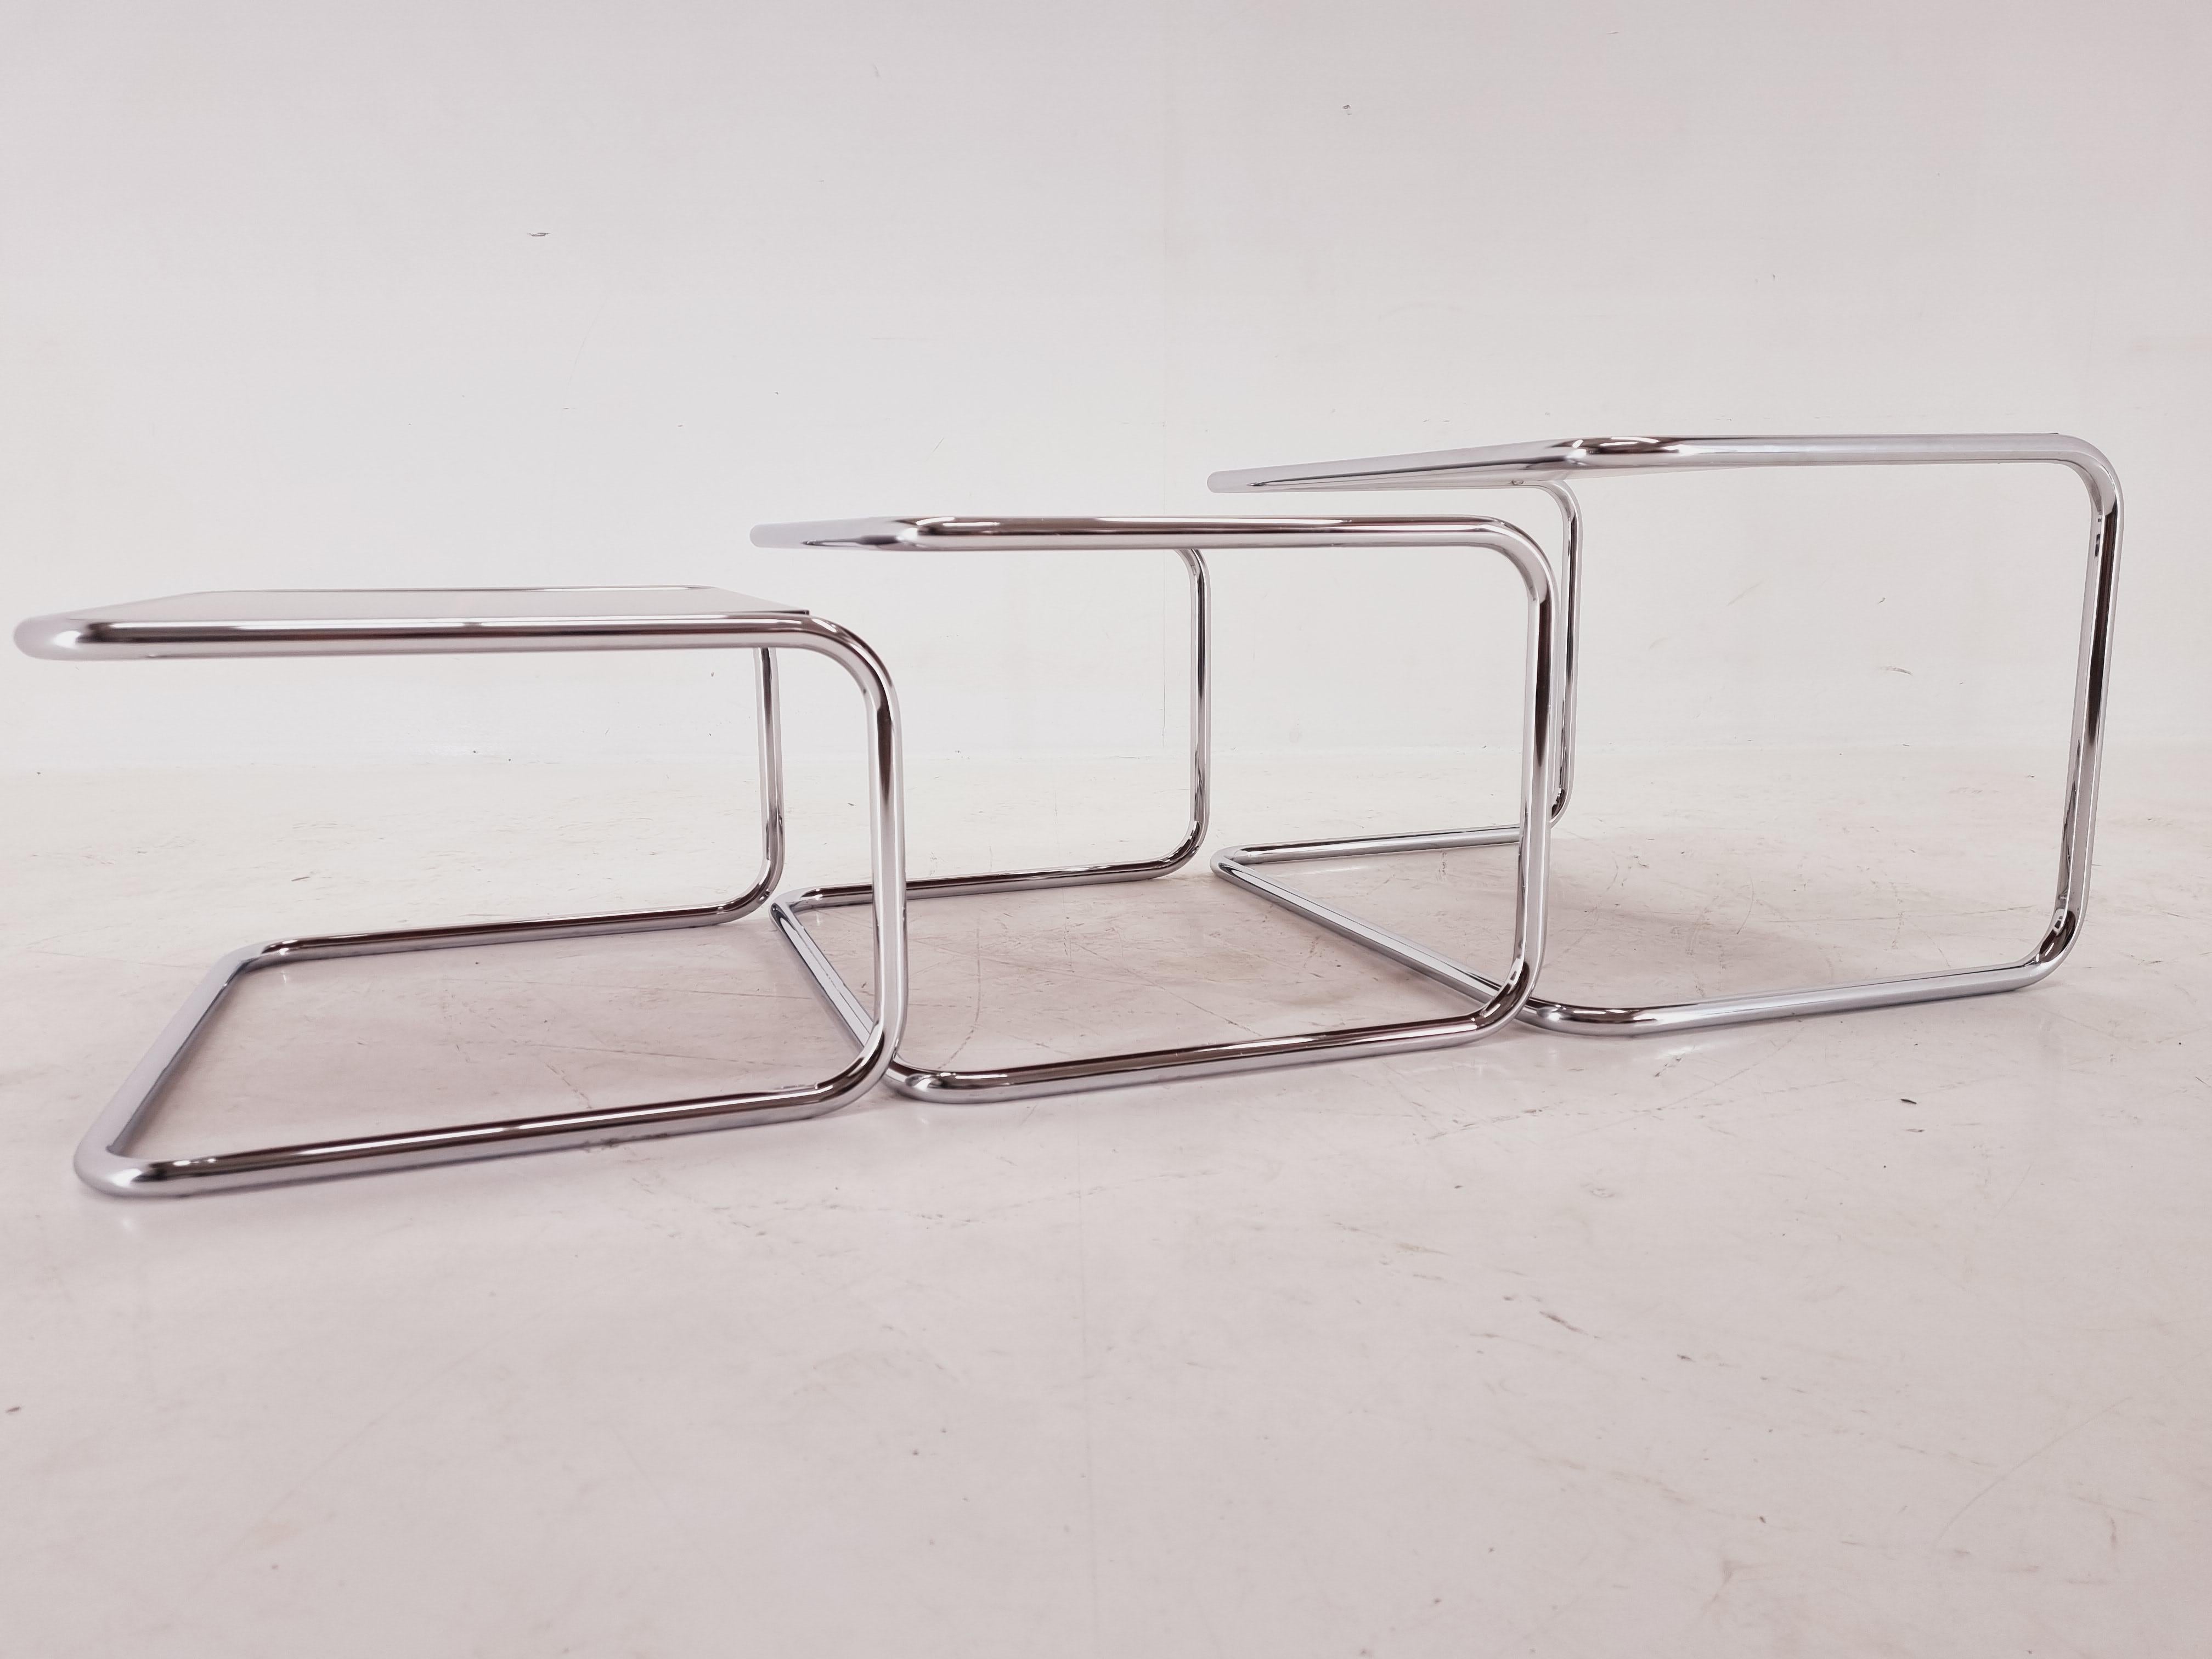 German Exclusive Rare Midcentury Nesting Tables, Cocobolo Palisandr and Chrome, 1950s. For Sale